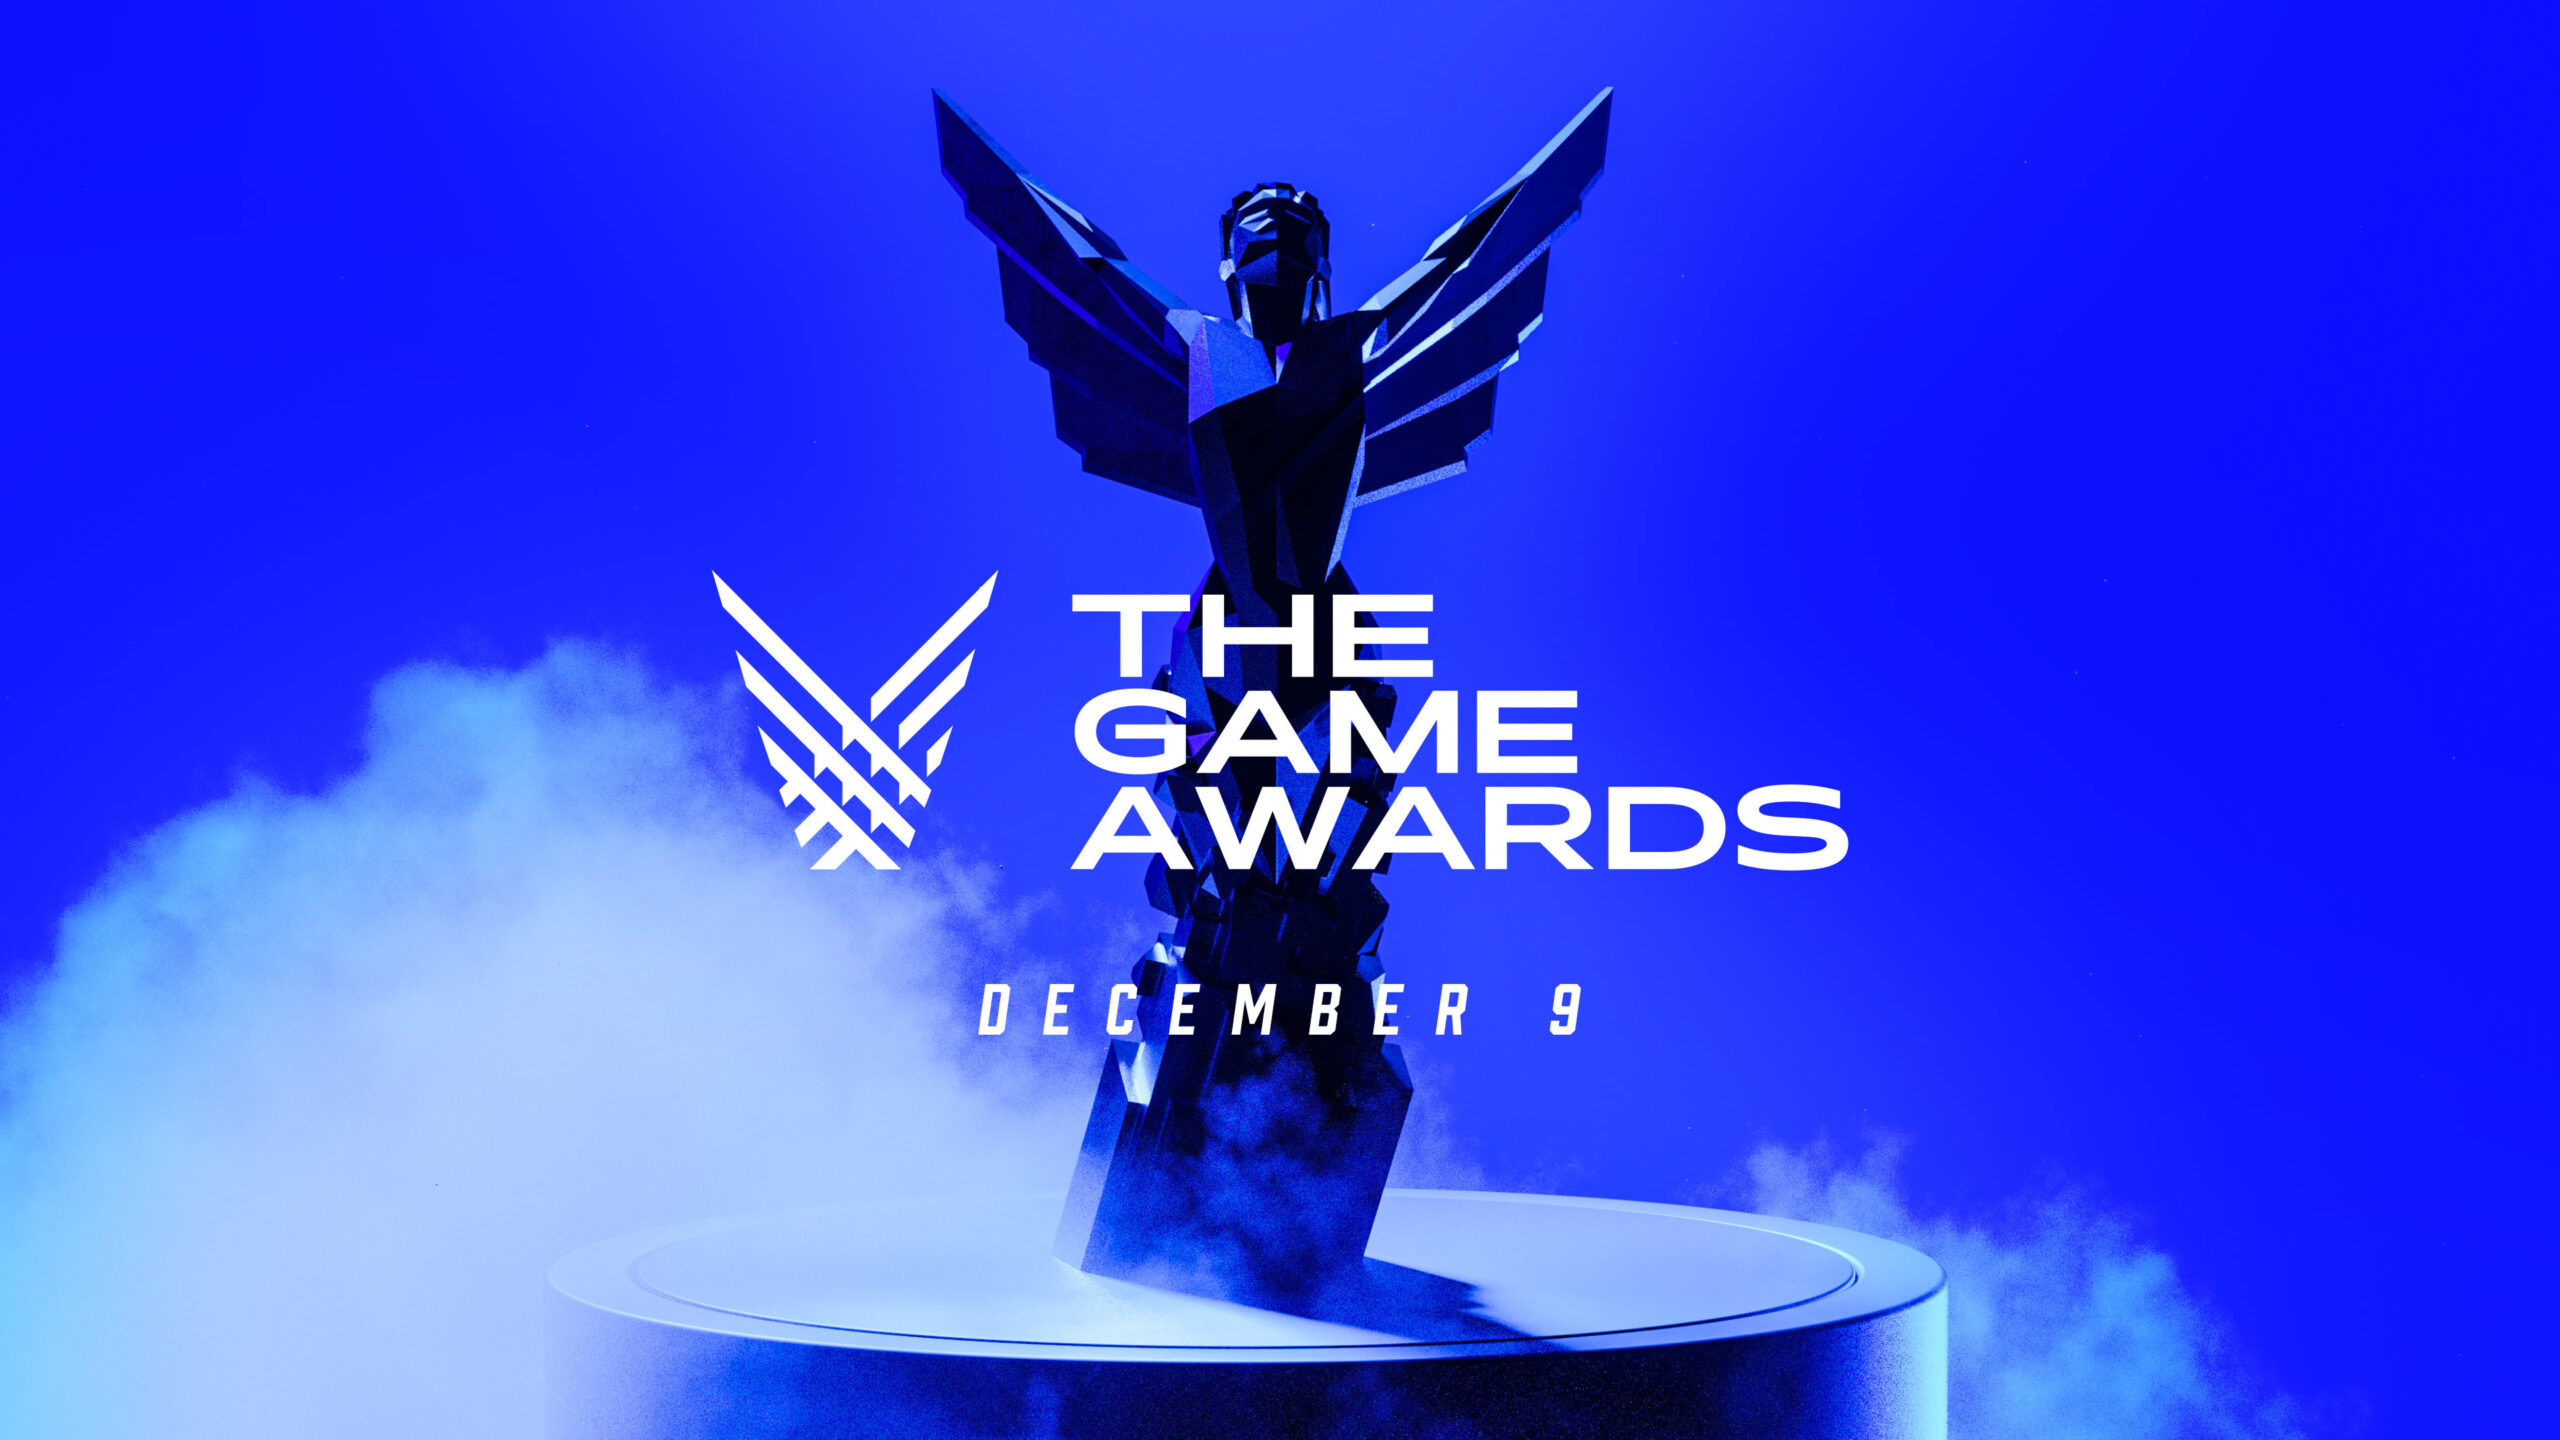 Gal Gadot, Brie Larson to Present at The Game Awards 2020